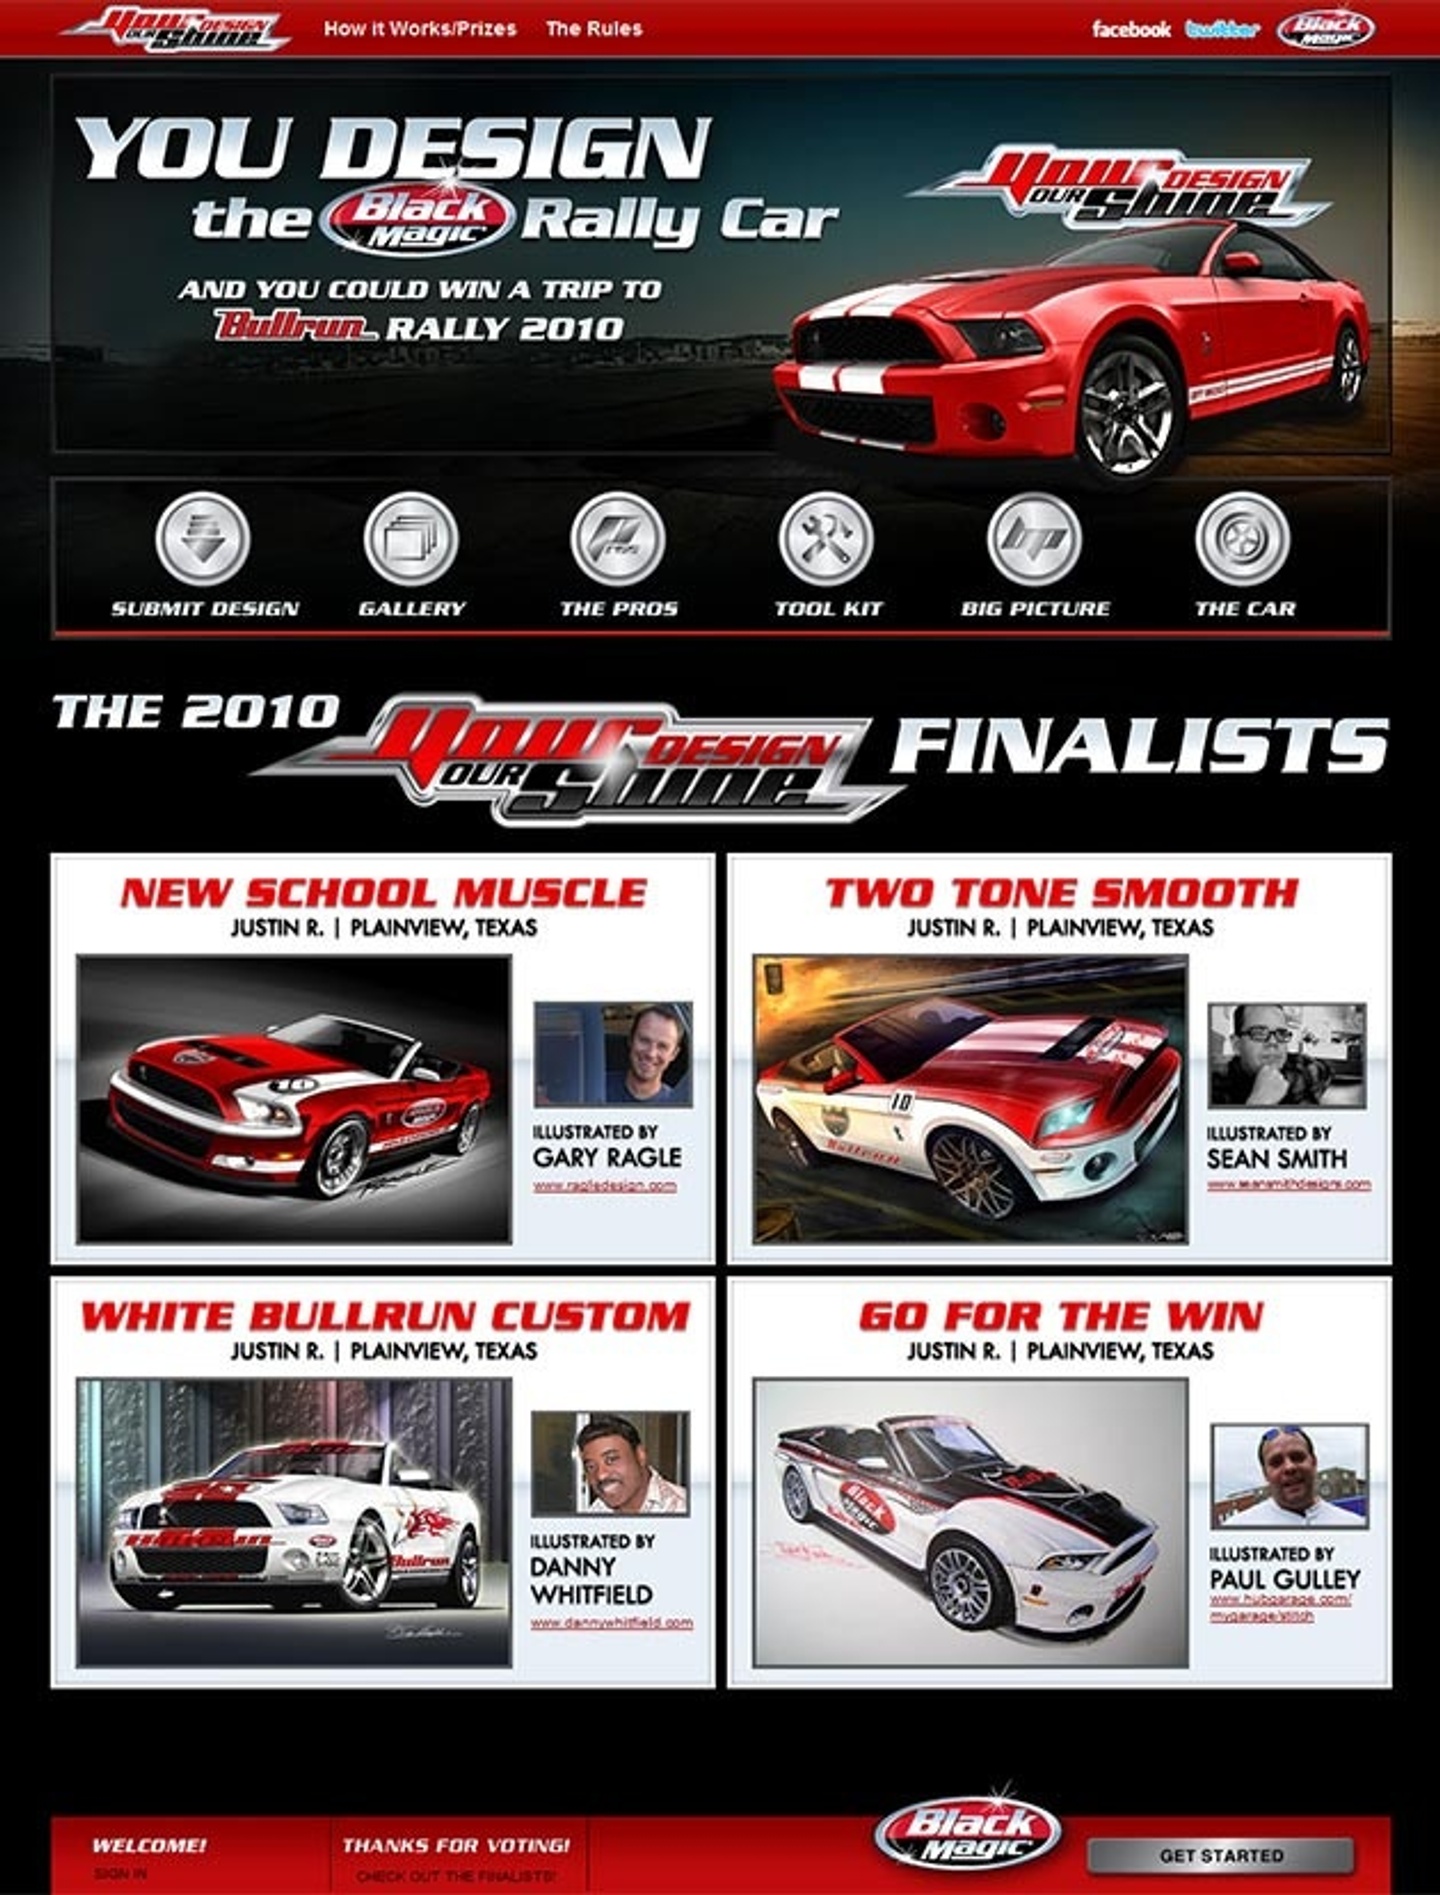 Screenshot of a website: the text "YOU DESIGN the Black Magic Rally Car" (with smaller text "AND YOU COULD WIN A TRIP TO Bullrun RALLY 2010" below) in the main banner, to the left of an image of a car and the text "YOU DESIGN OUR SHINE". The text is set in a glinting metallic font, the website accented in vibrant red tones. The rest of the website contains information about the contest and sample submissions.